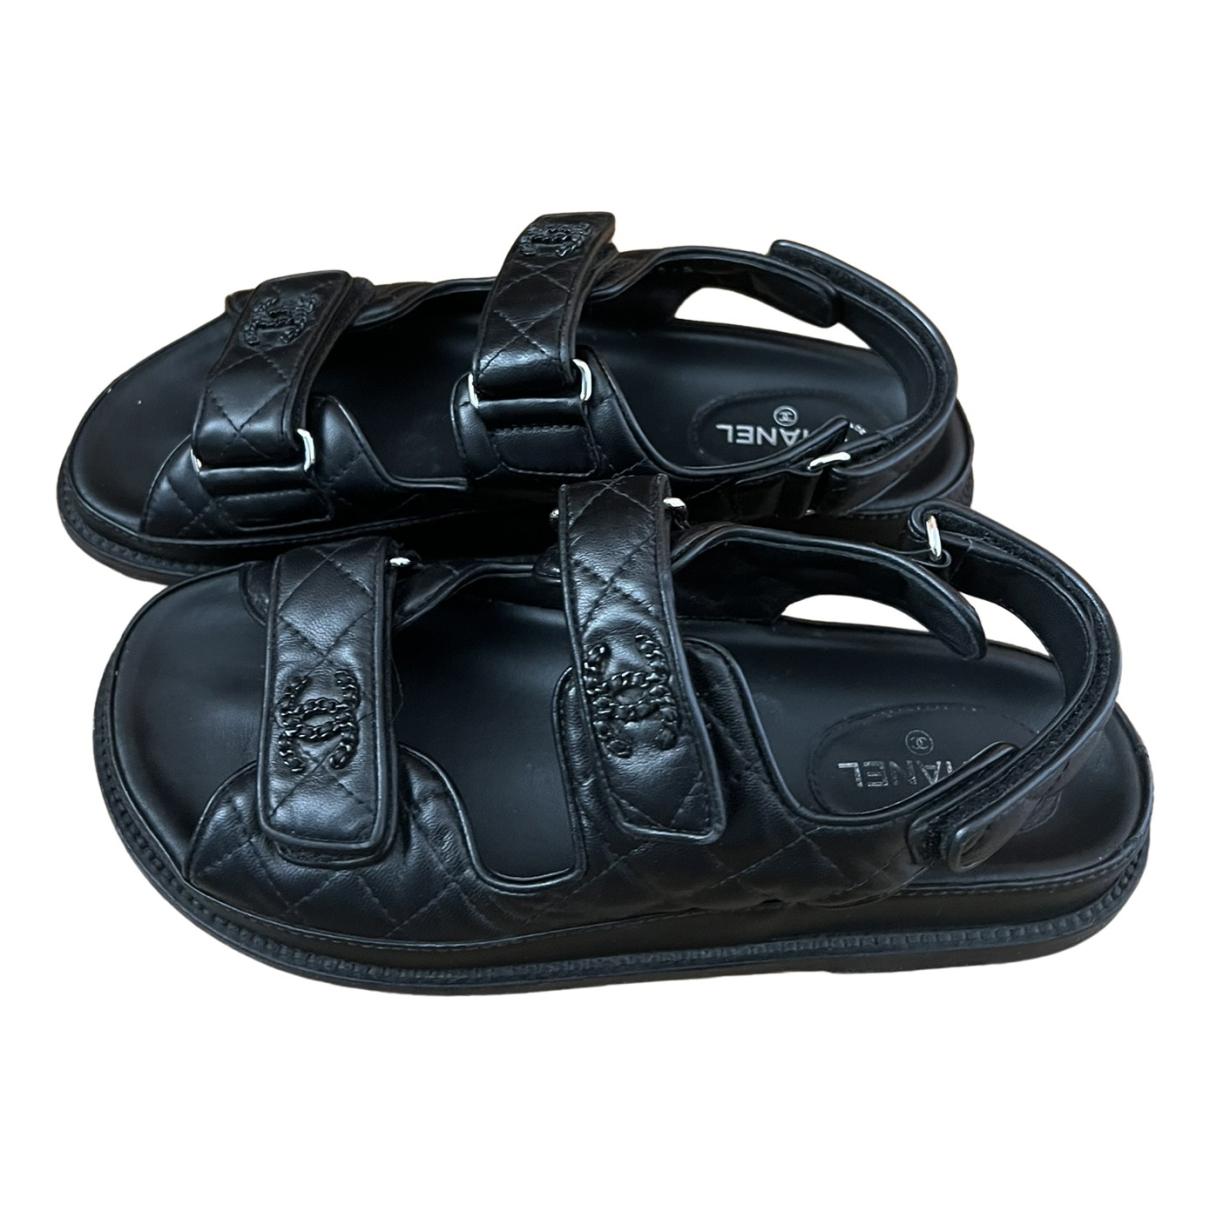 Dad sandals leather sandal Chanel Black size 38 EU in Leather - 33159902